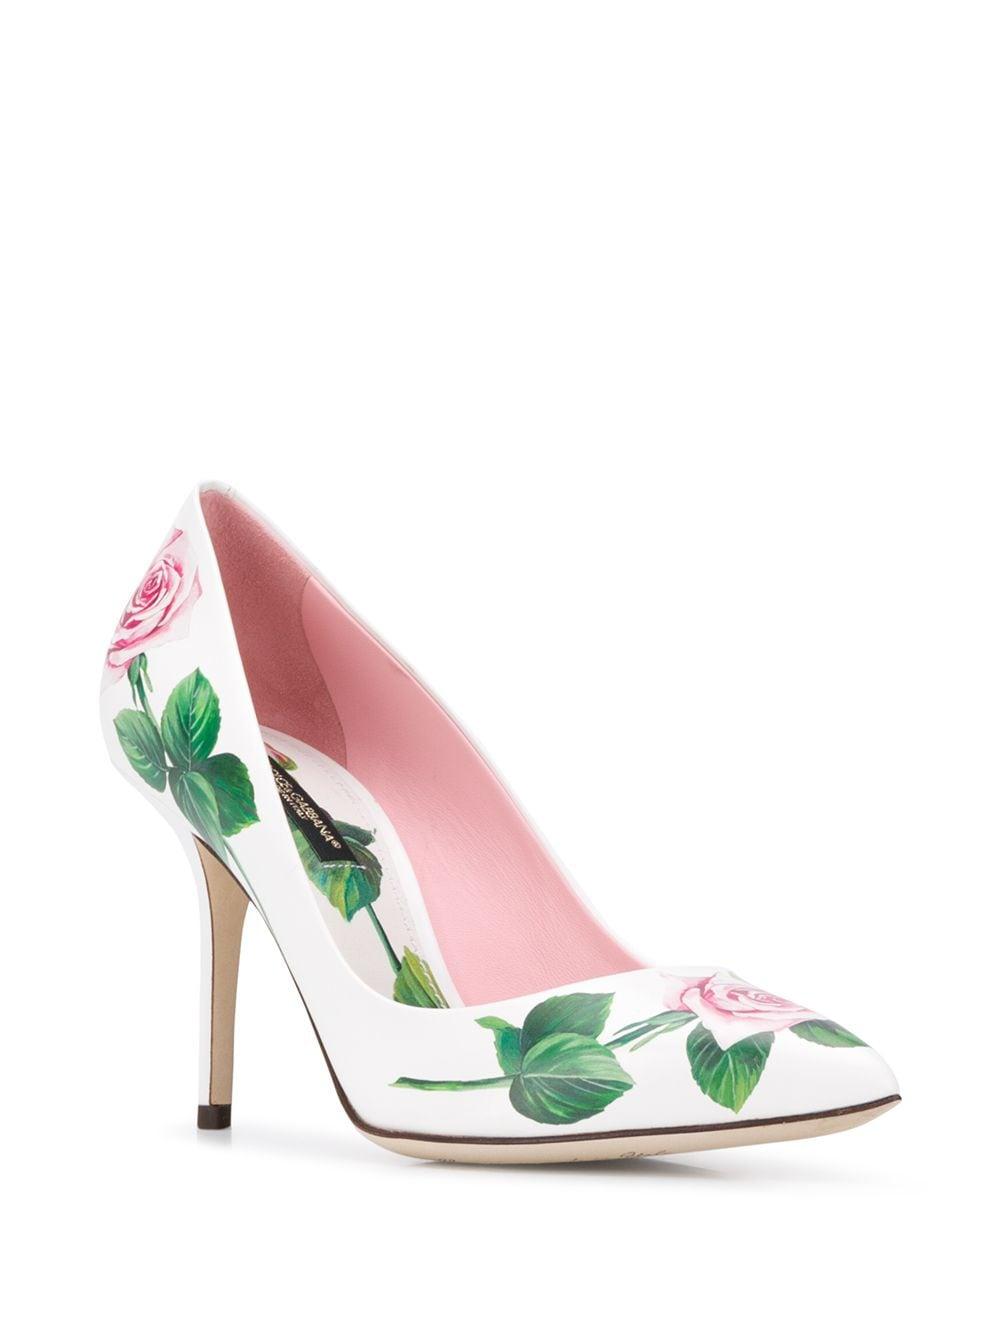 Dolce & Gabbana Leather Rose Print Pumps in White - Lyst